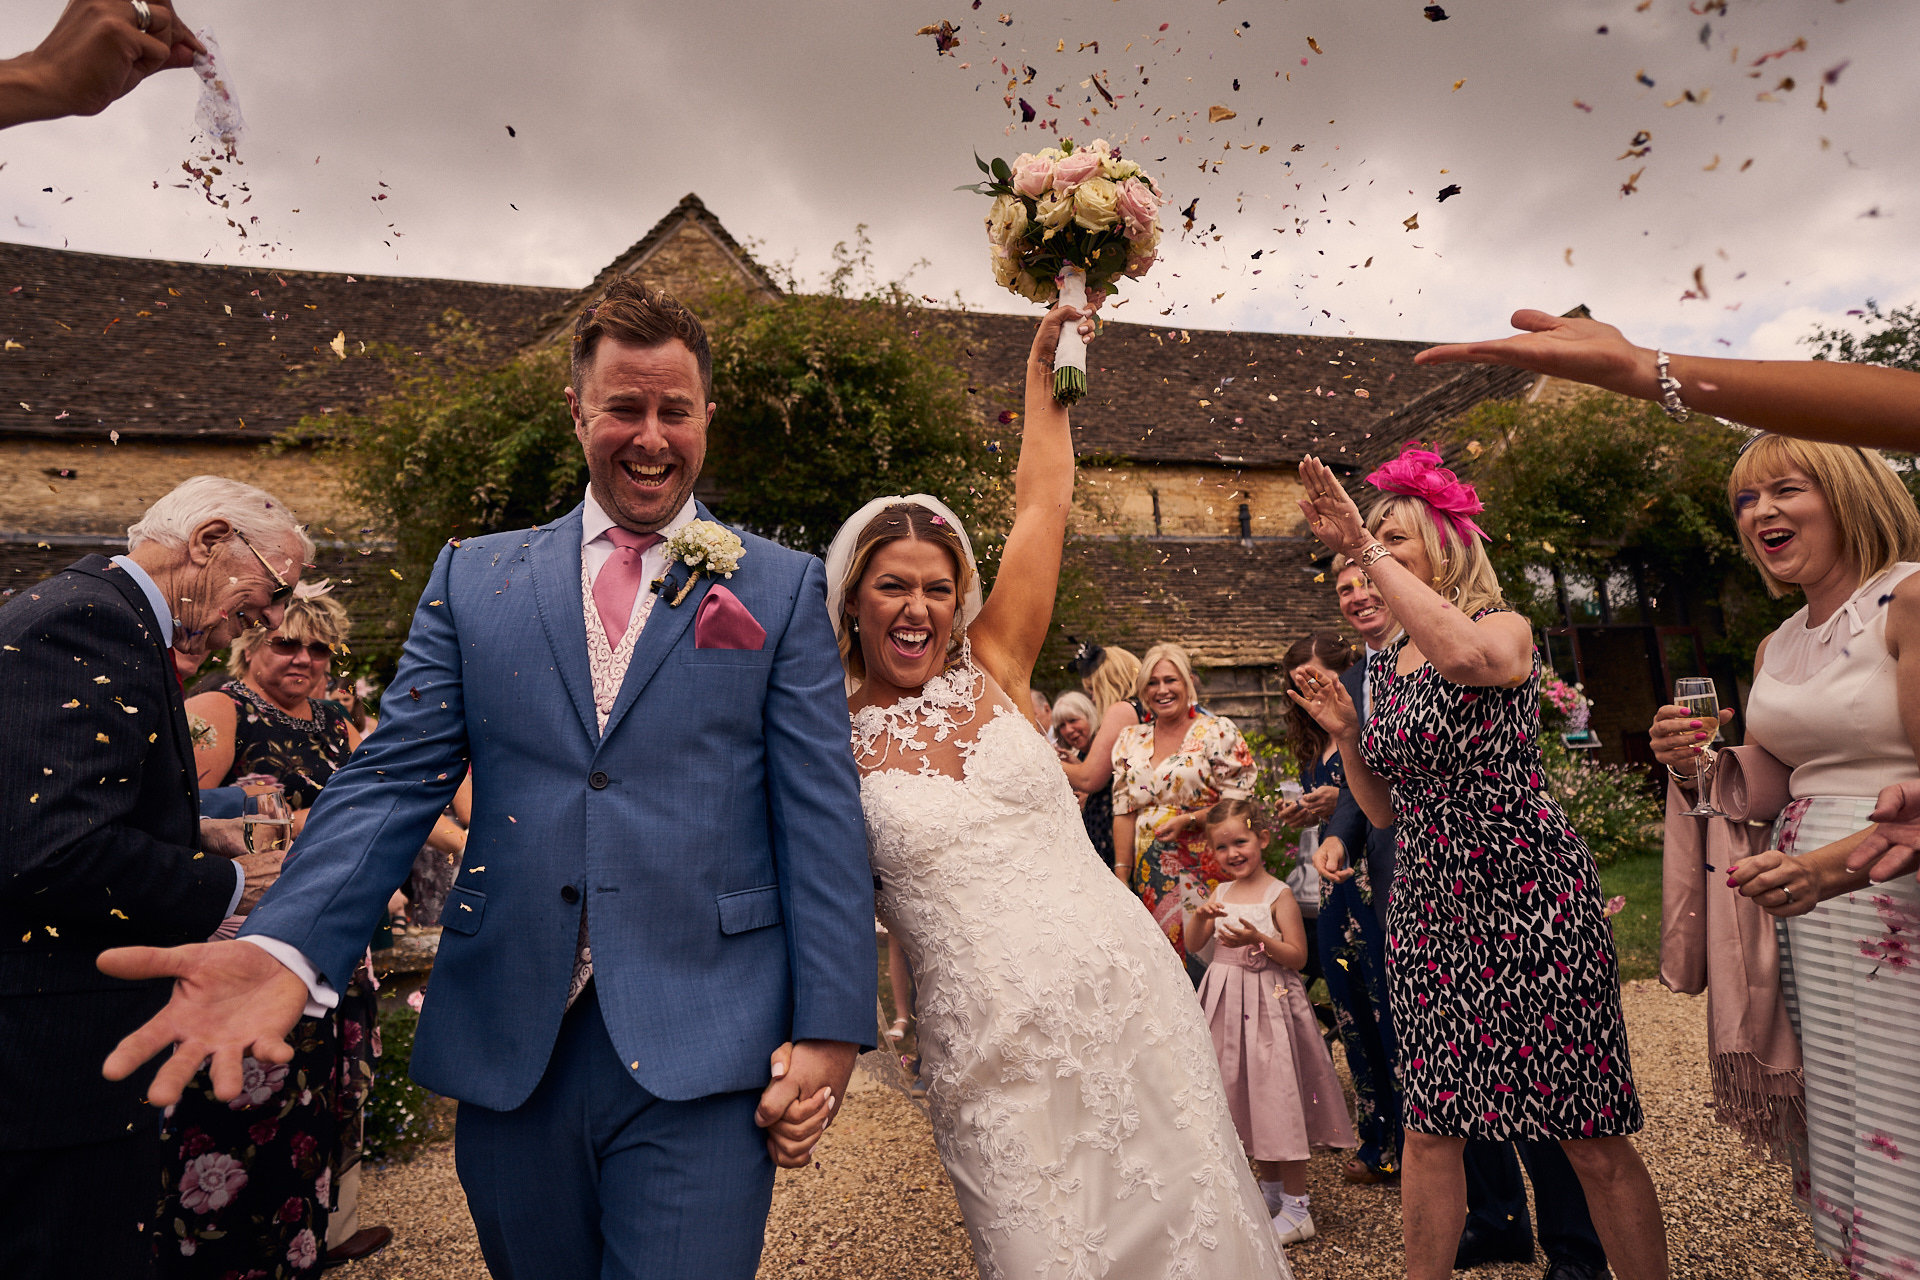 Confetti being thrown over bride and groom outside of The great tythe barn wedding venue